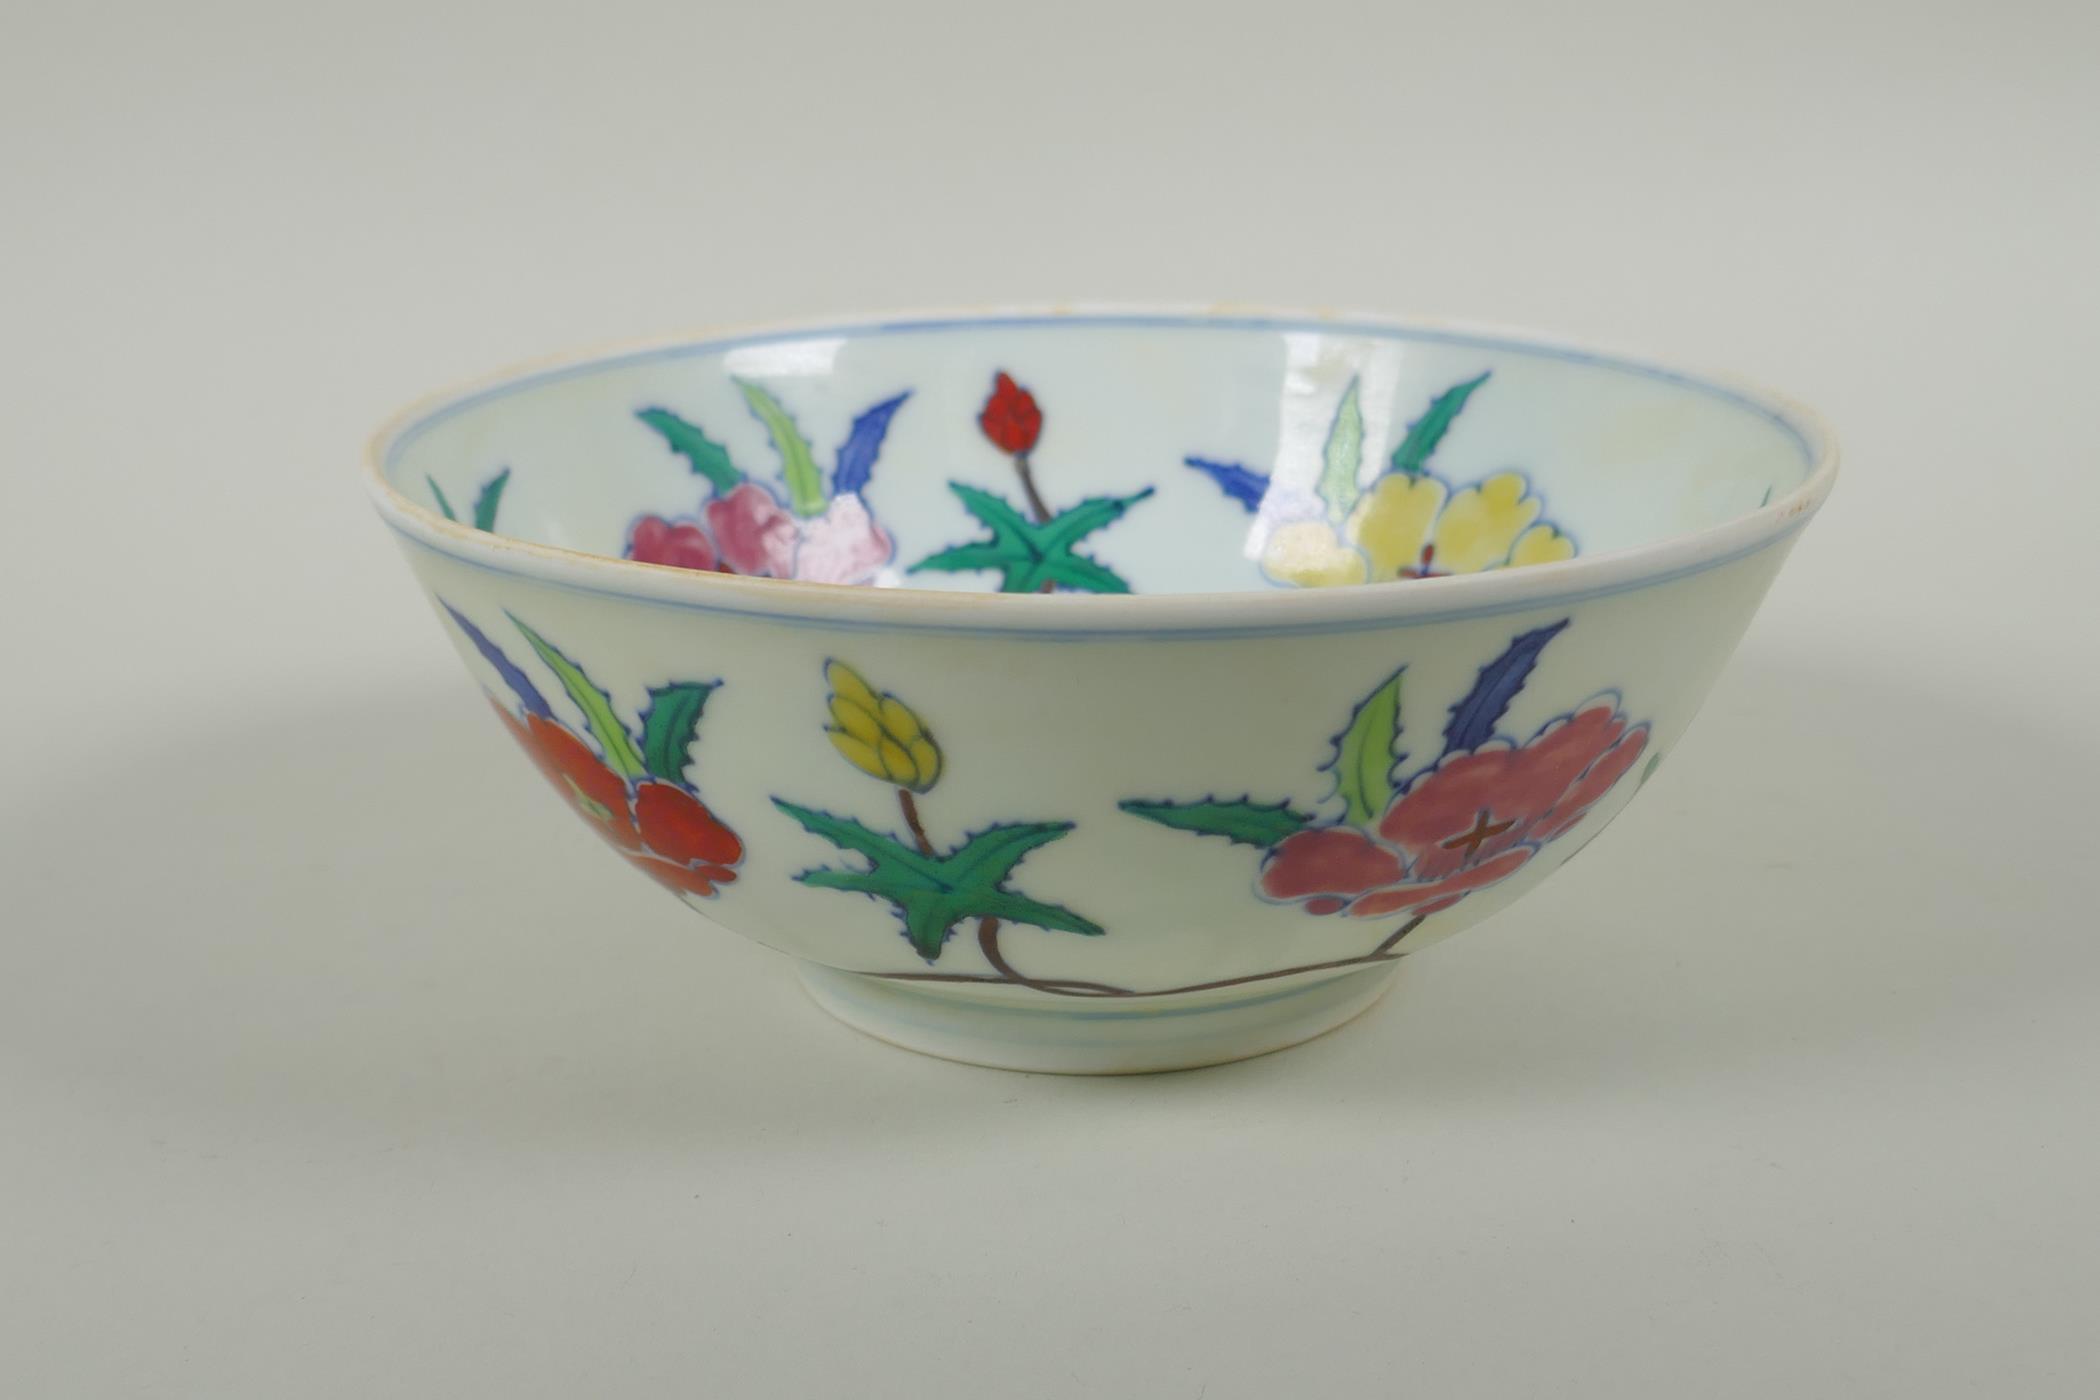 A Chinese Wucai porcelain bowl with floral decoration, Chenghua 6 character mark to base, 19cm